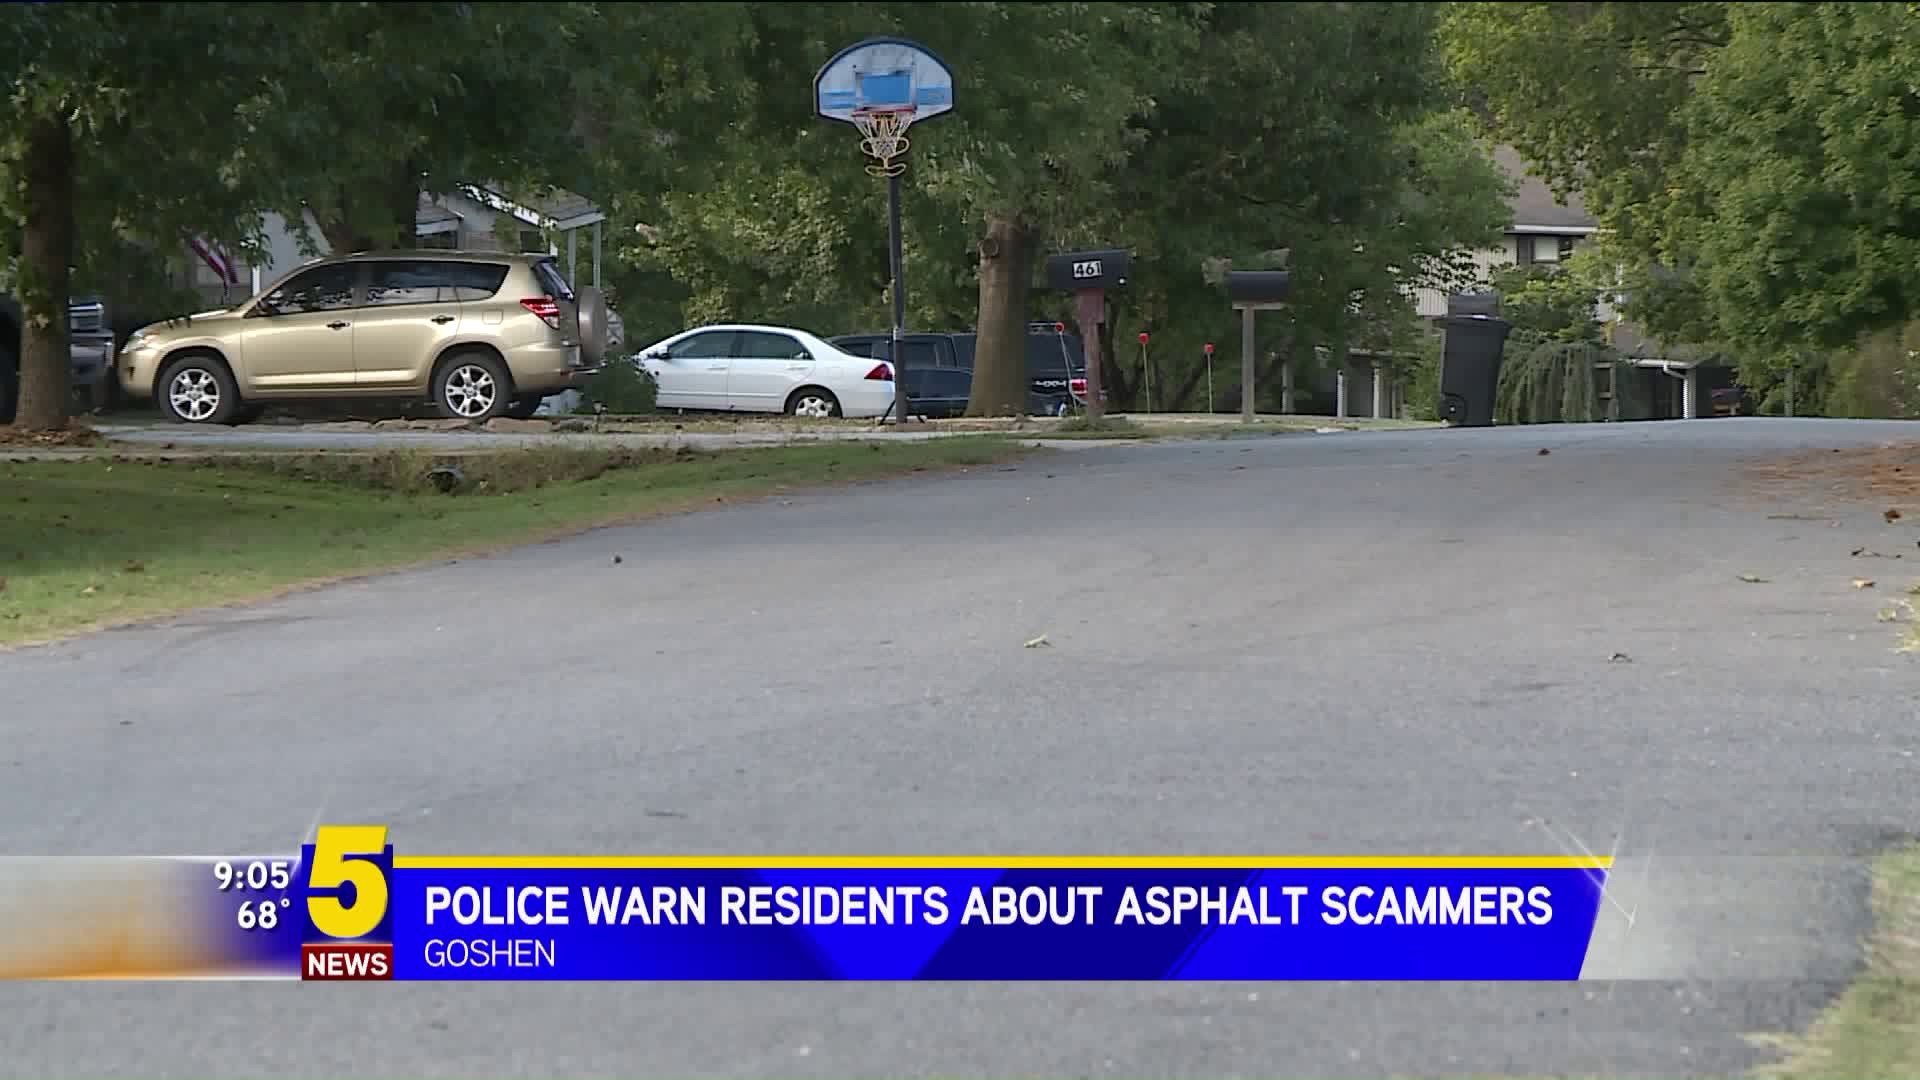 Police Warn Residents About Asphalt Scammers